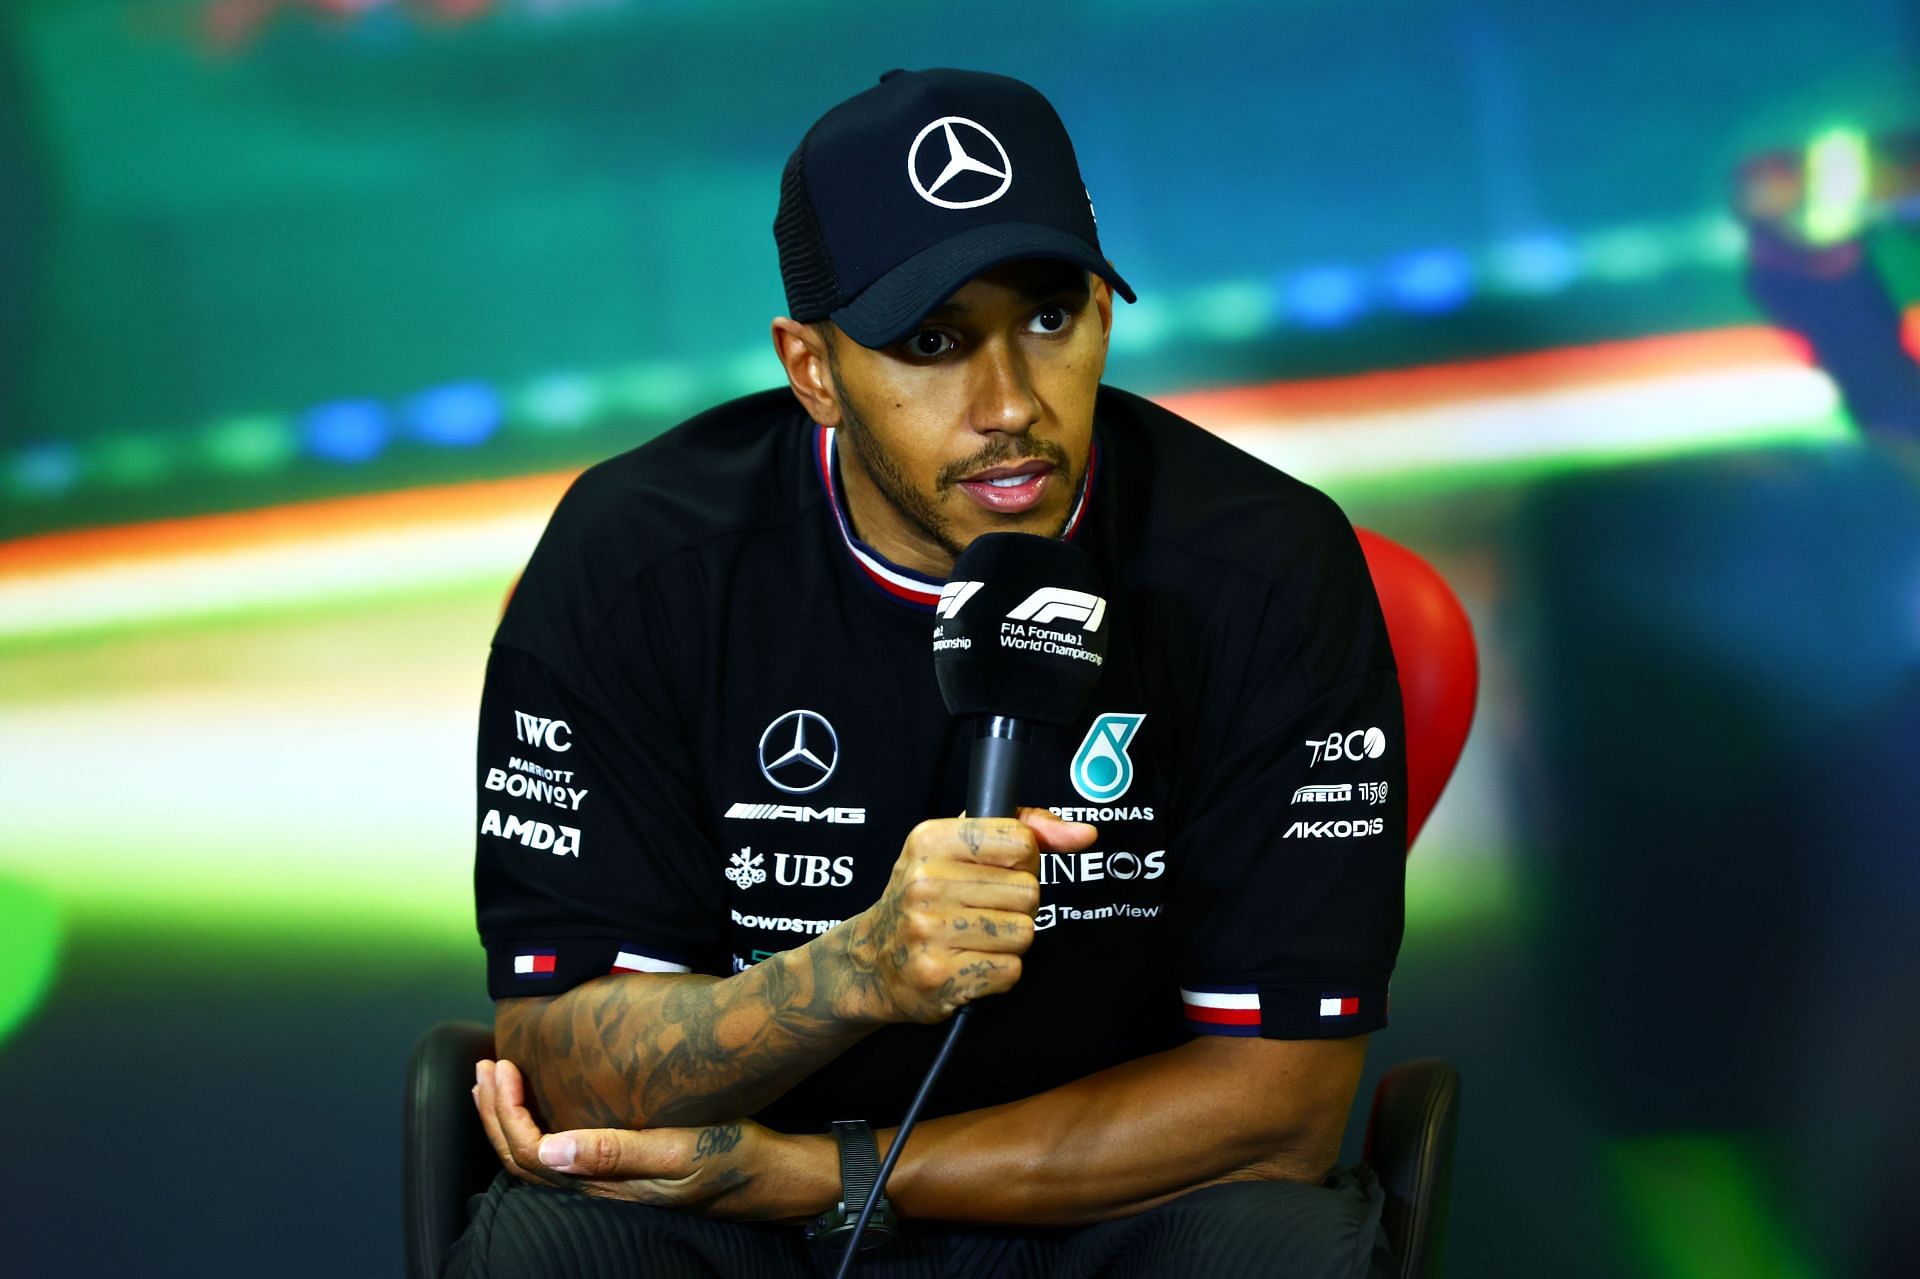 Hamilton reflected on recovering from an uncompetitive car at the start of the season